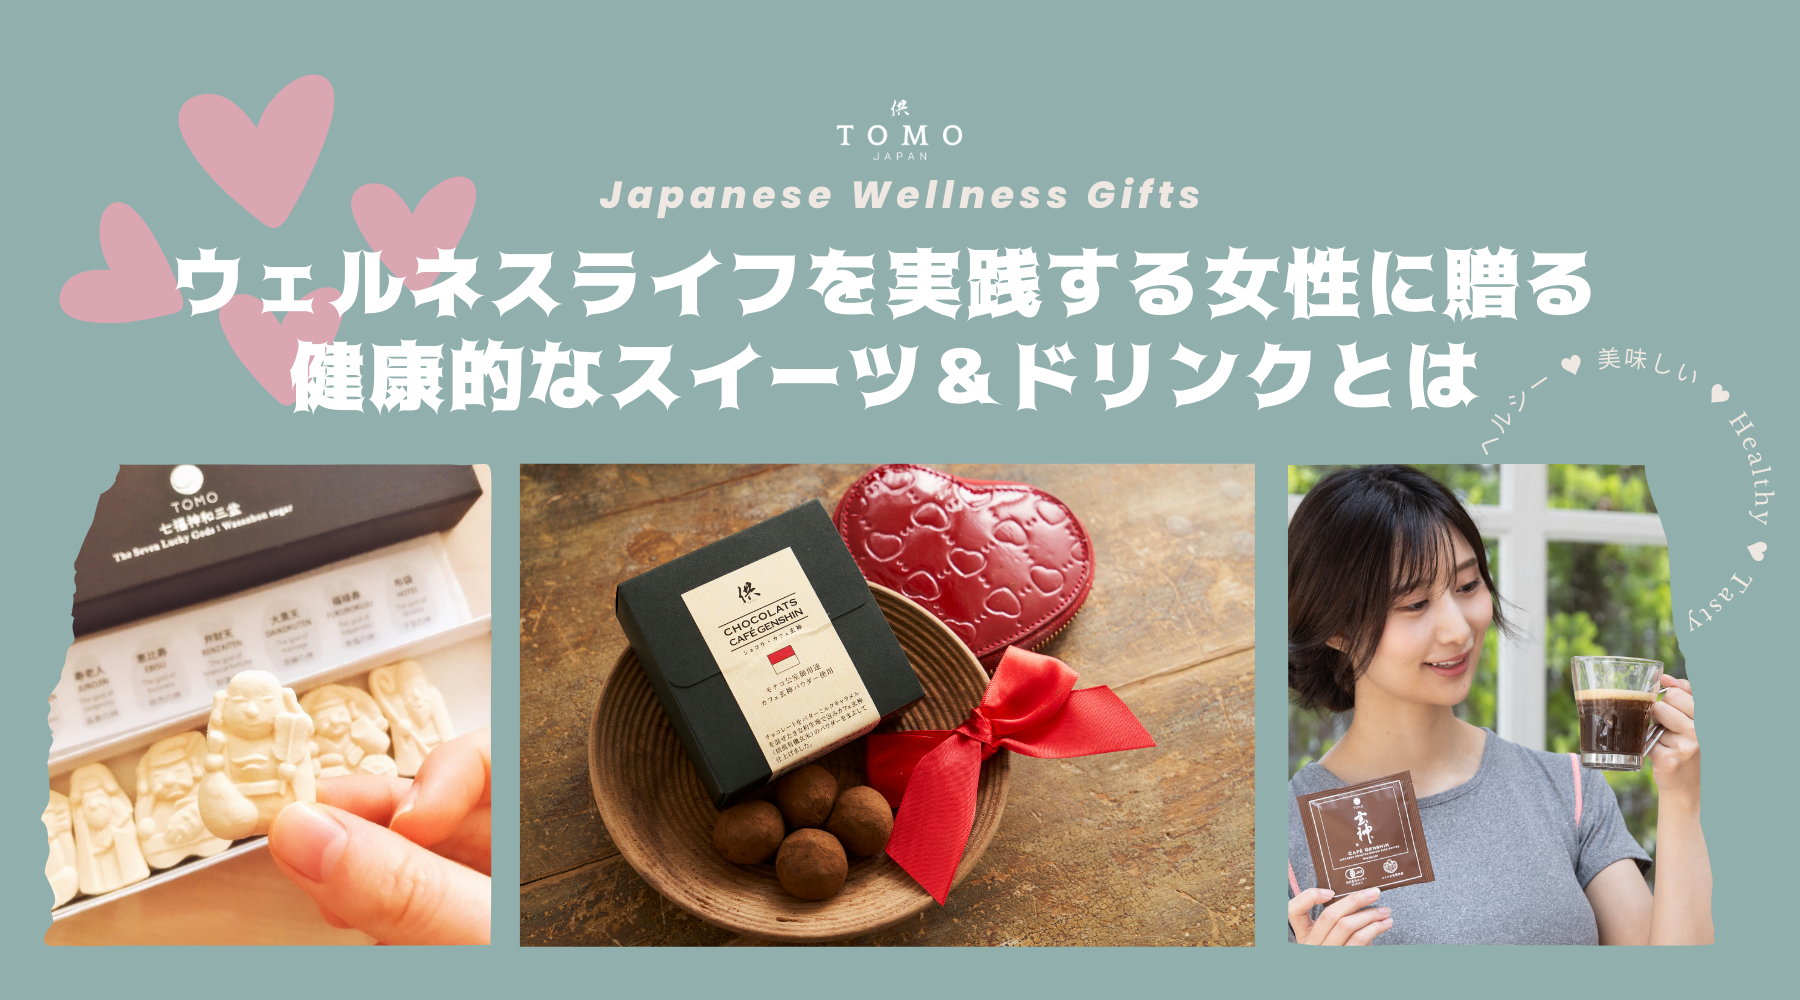 Why Should You Try These Japanese Wellness Gifts For White Day? – 供TOMO  玄米コーヒーオンラインストア